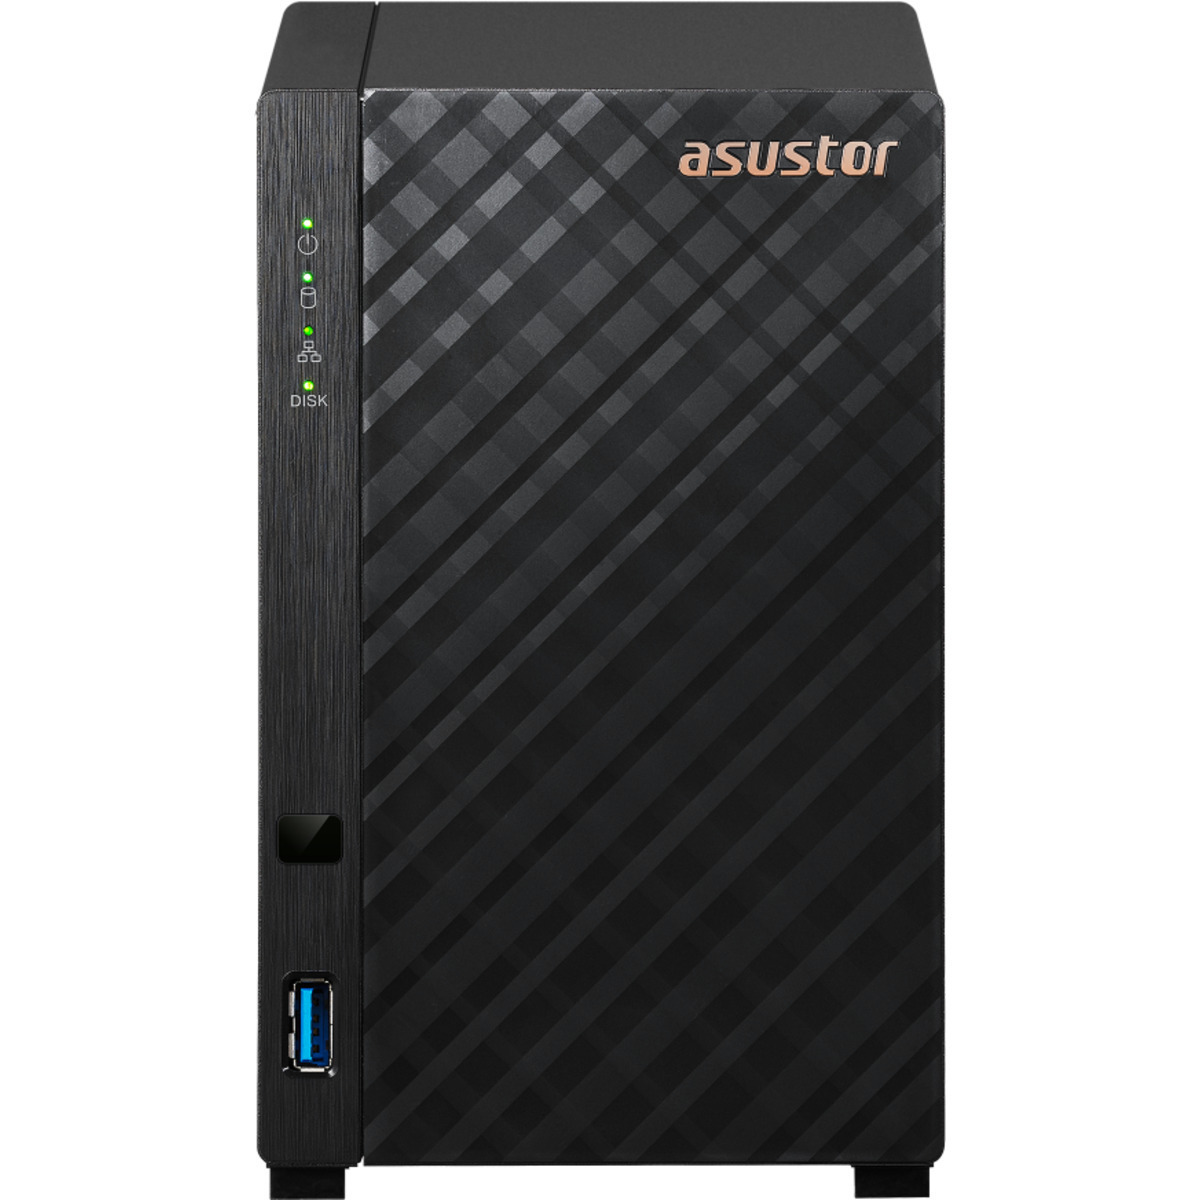 buy $353 ASUSTOR DRIVESTOR 2 AS1102T 2tb Desktop NAS - Network Attached Storage Device 2x1000gb Western Digital Blue WD10EZRZ 3.5 5400rpm SATA 6Gb/s HDD CONSUMER Class Drives Installed - Burn-In Tested - nas headquarters buy network attached storage server device das new raid-5 free shipping usa DRIVESTOR 2 AS1102T